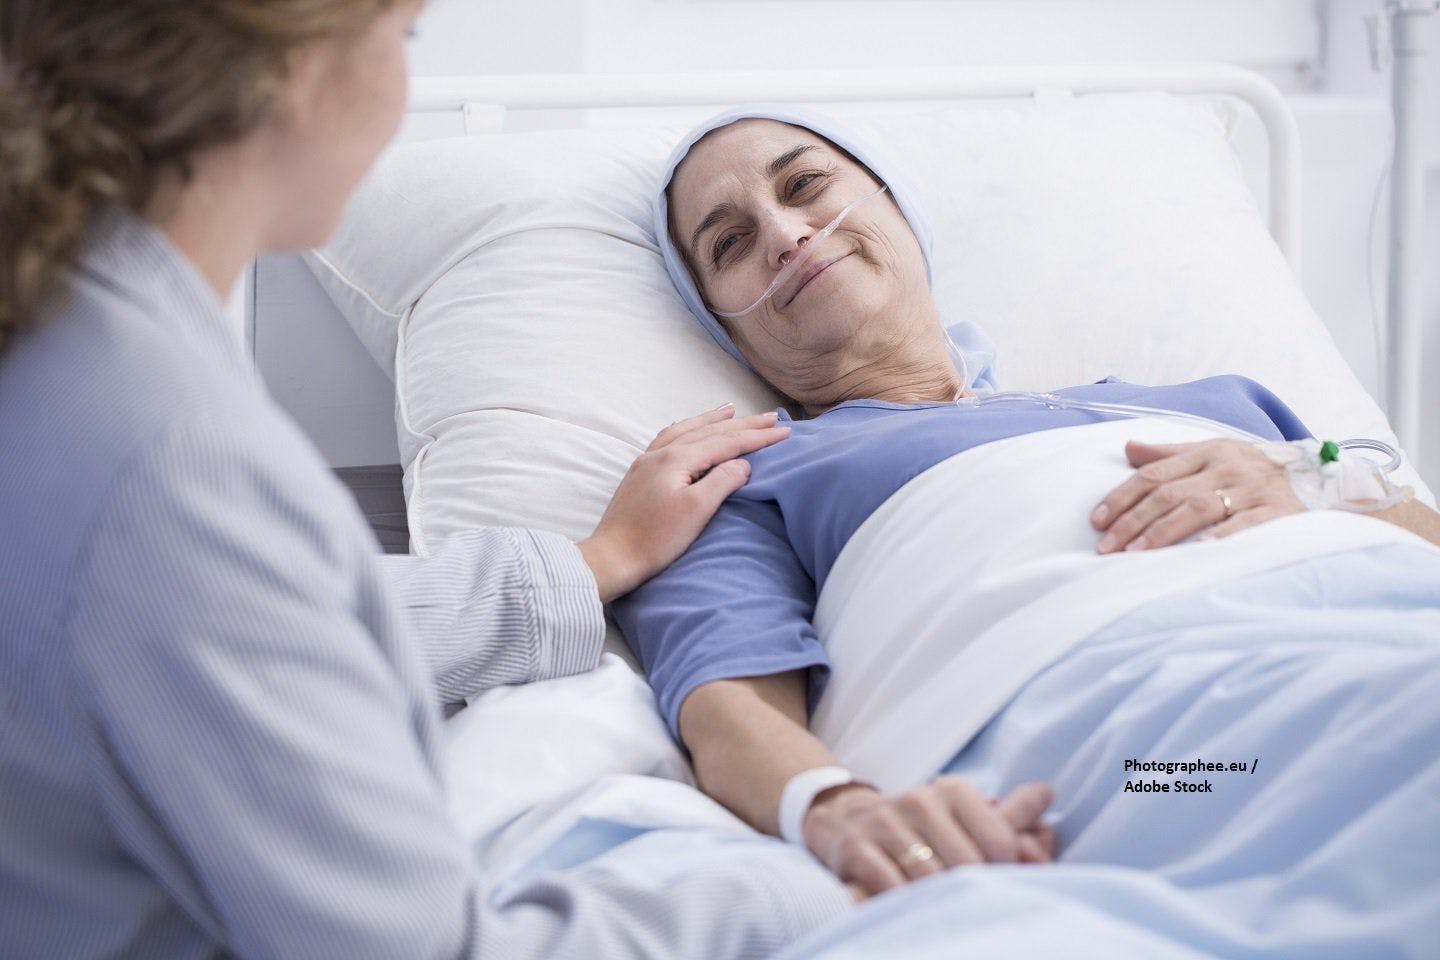 Hospitalized Patients with Cancer May Face More Physical and Psychological Symptoms